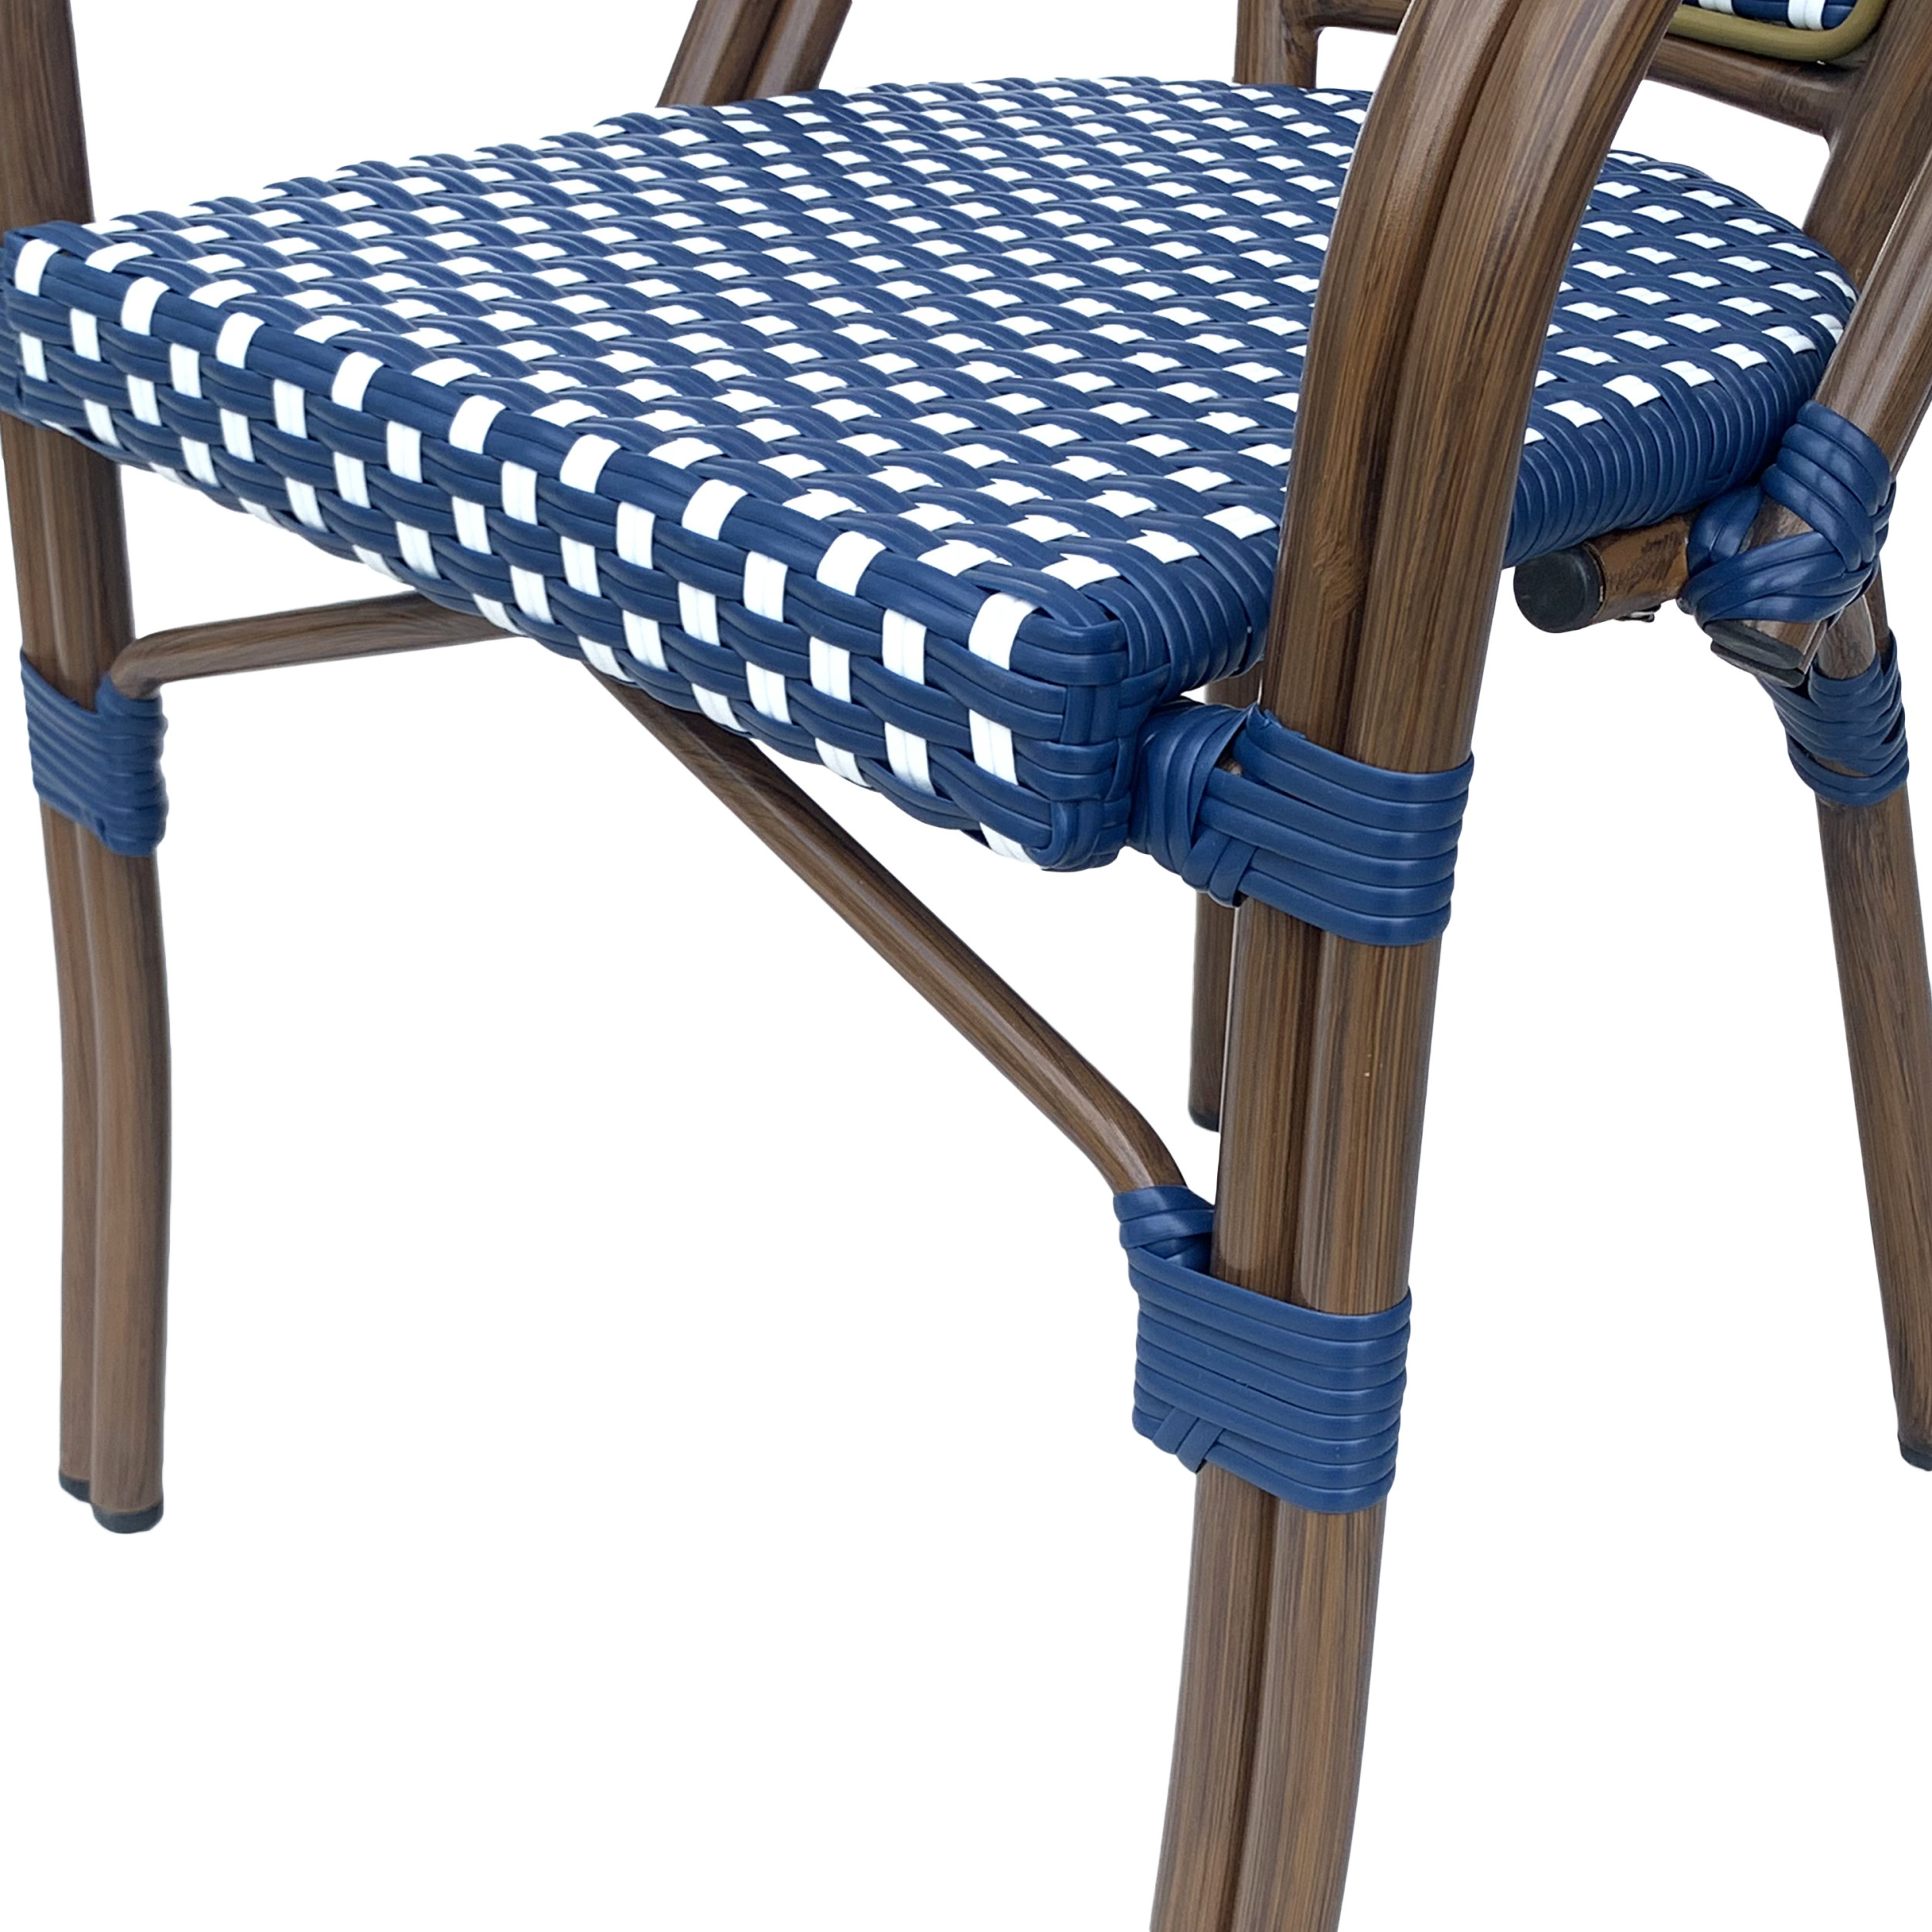 Cecil Aluminum and Wicker Outdoor French Bistro Chairs, Set of 4, Navy Blue, White, and Brown Wood - image 4 of 7